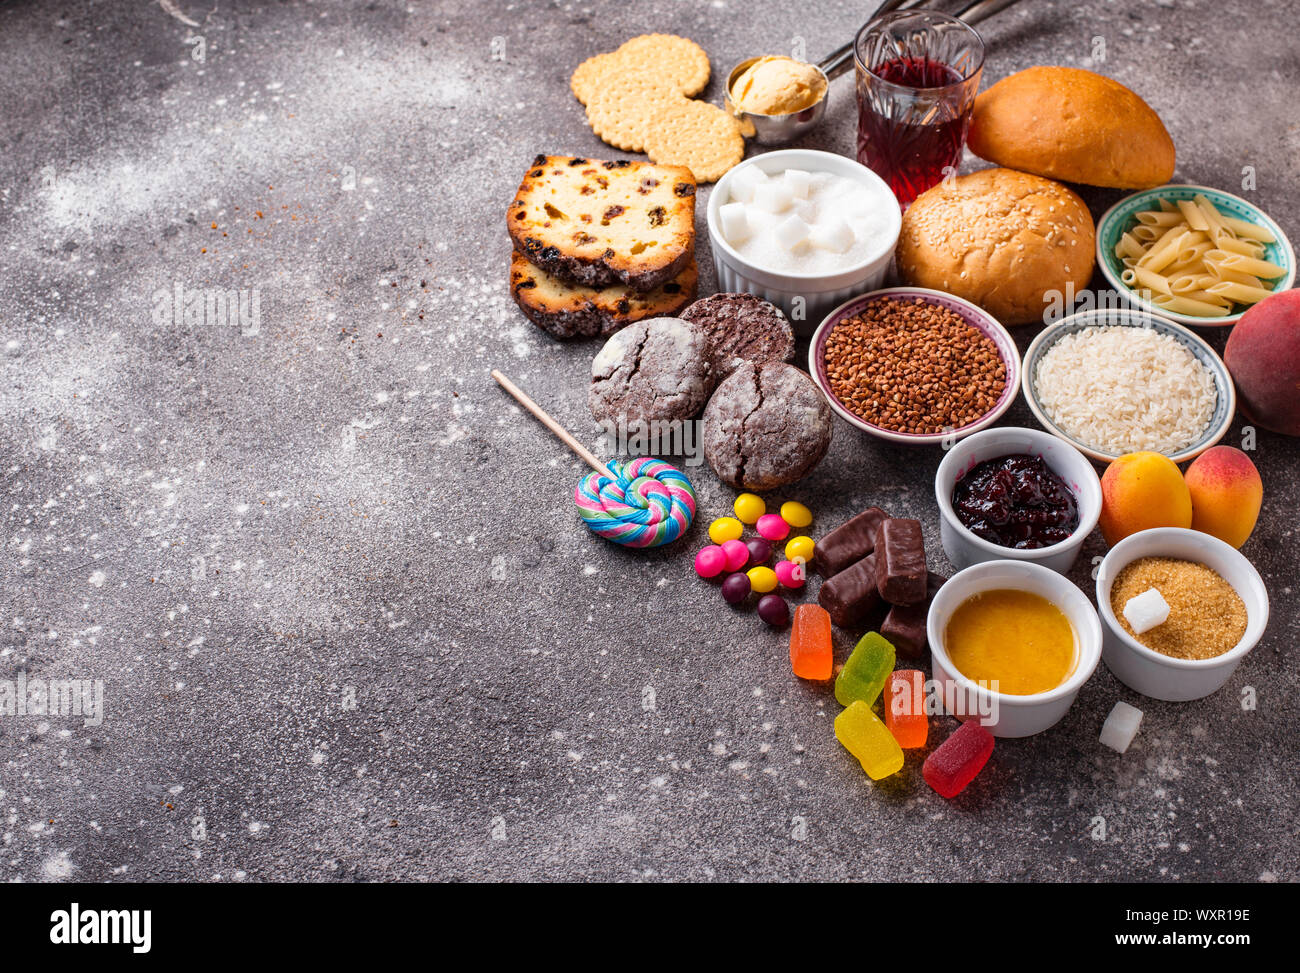 Assortment of simple carbohydrates food Stock Photo